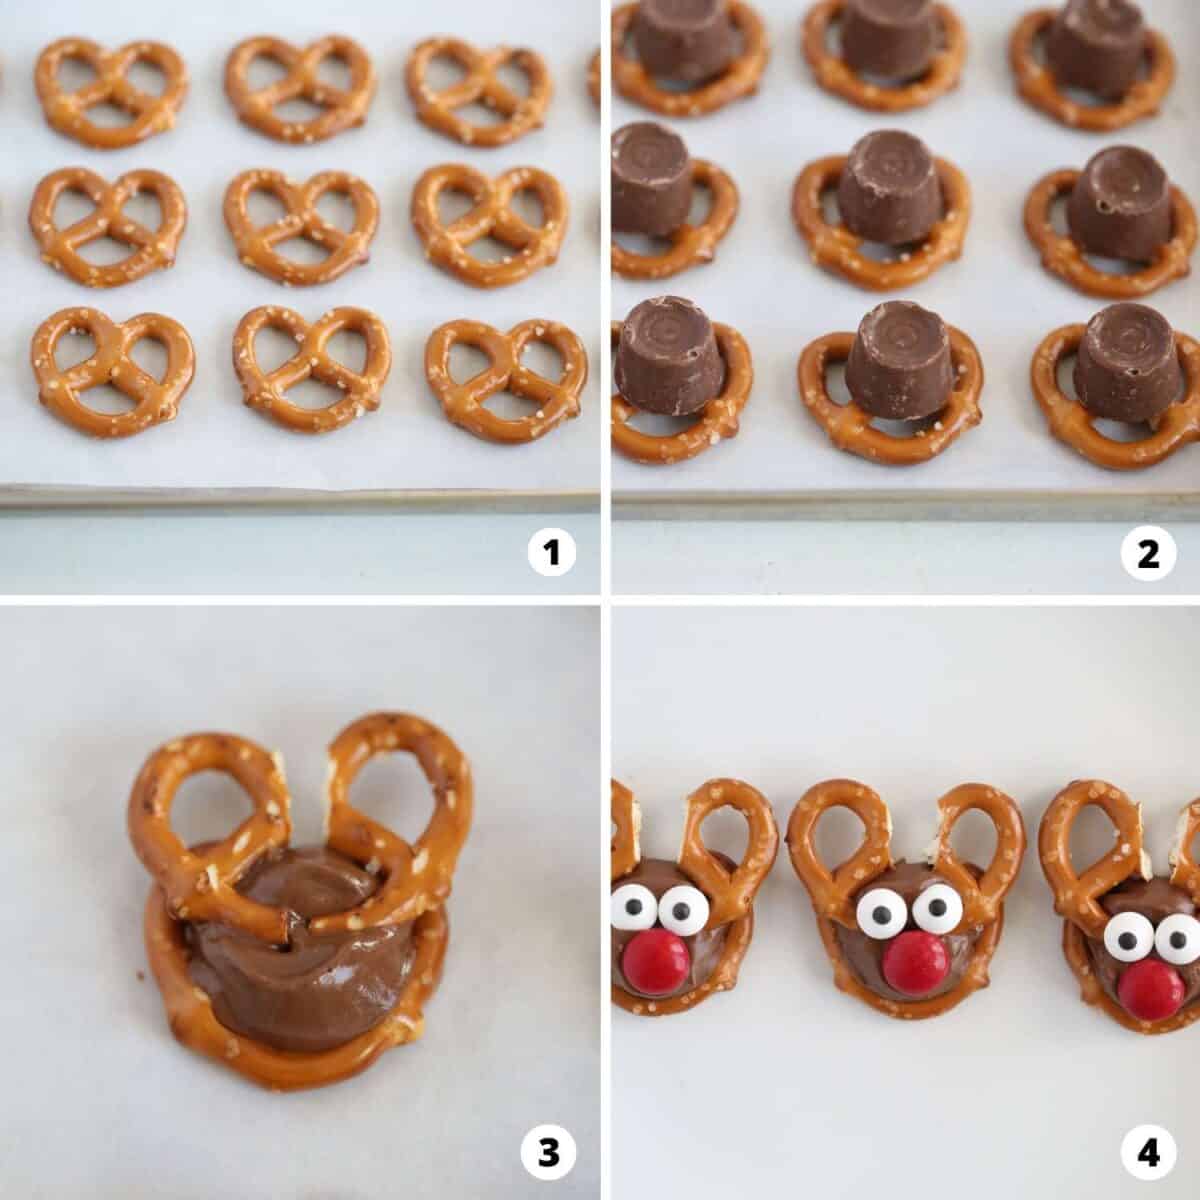 The process of making rolo pretzels in a 4 step collage.